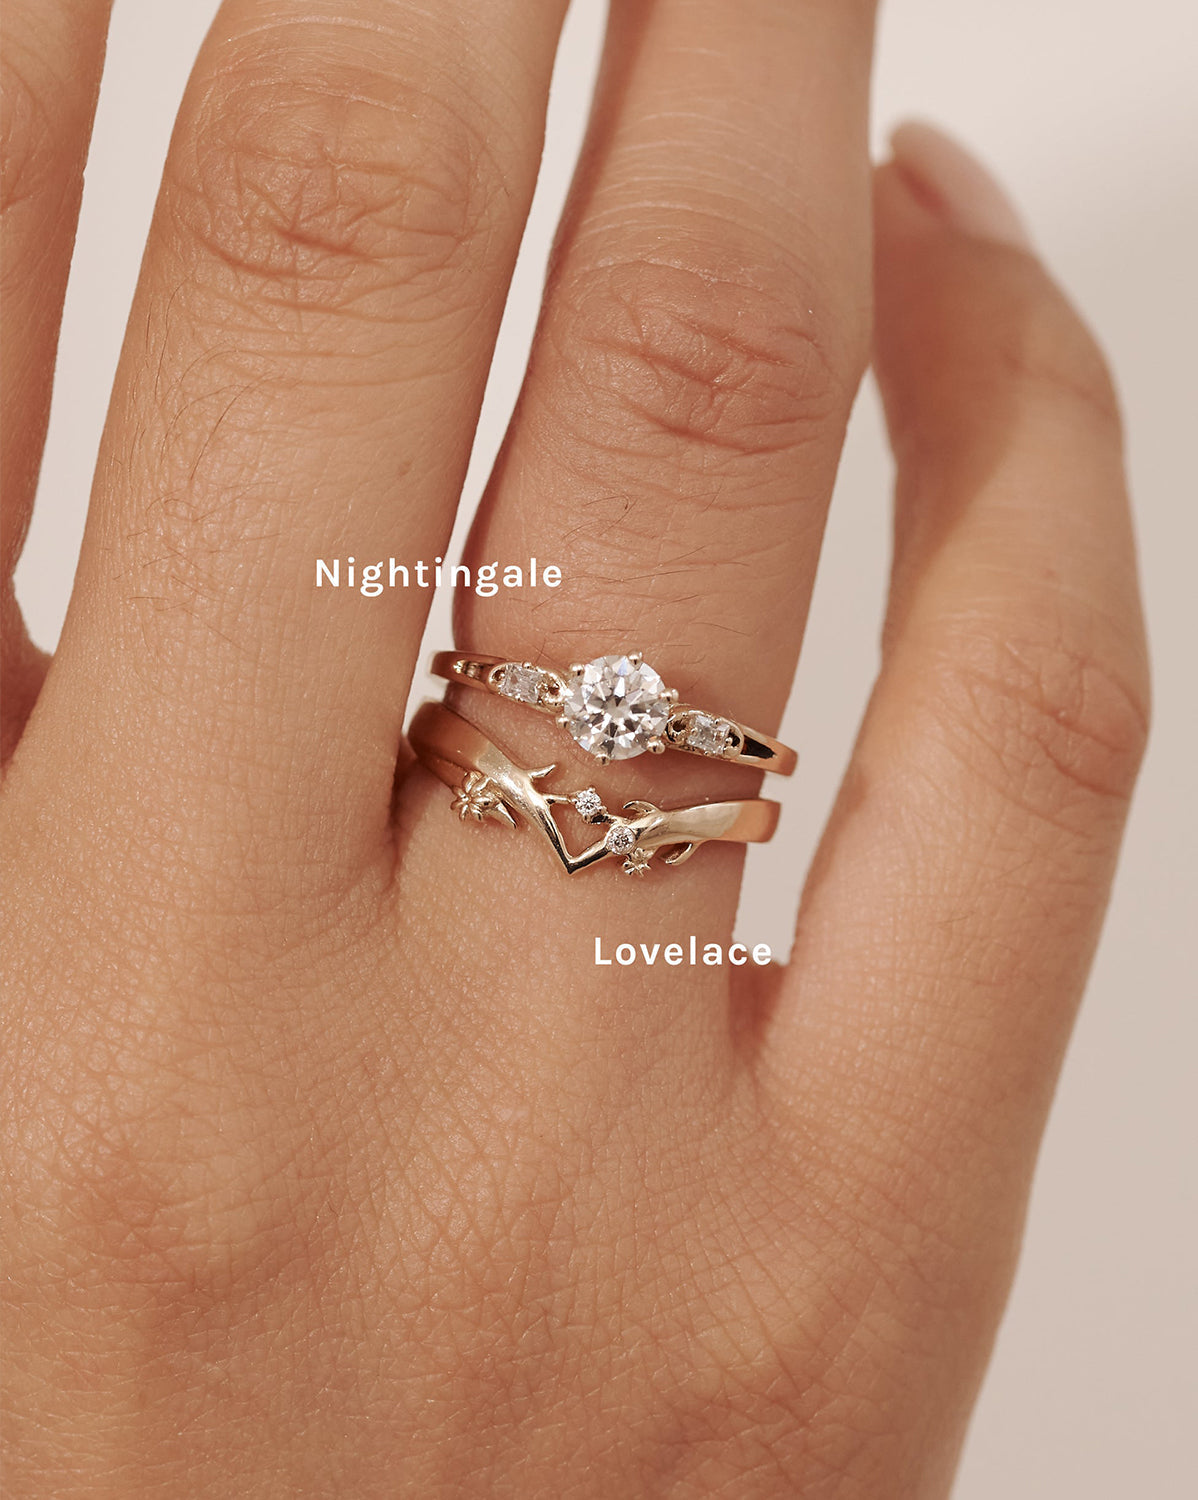 Solid Gold Nightingale Solitaire Ring